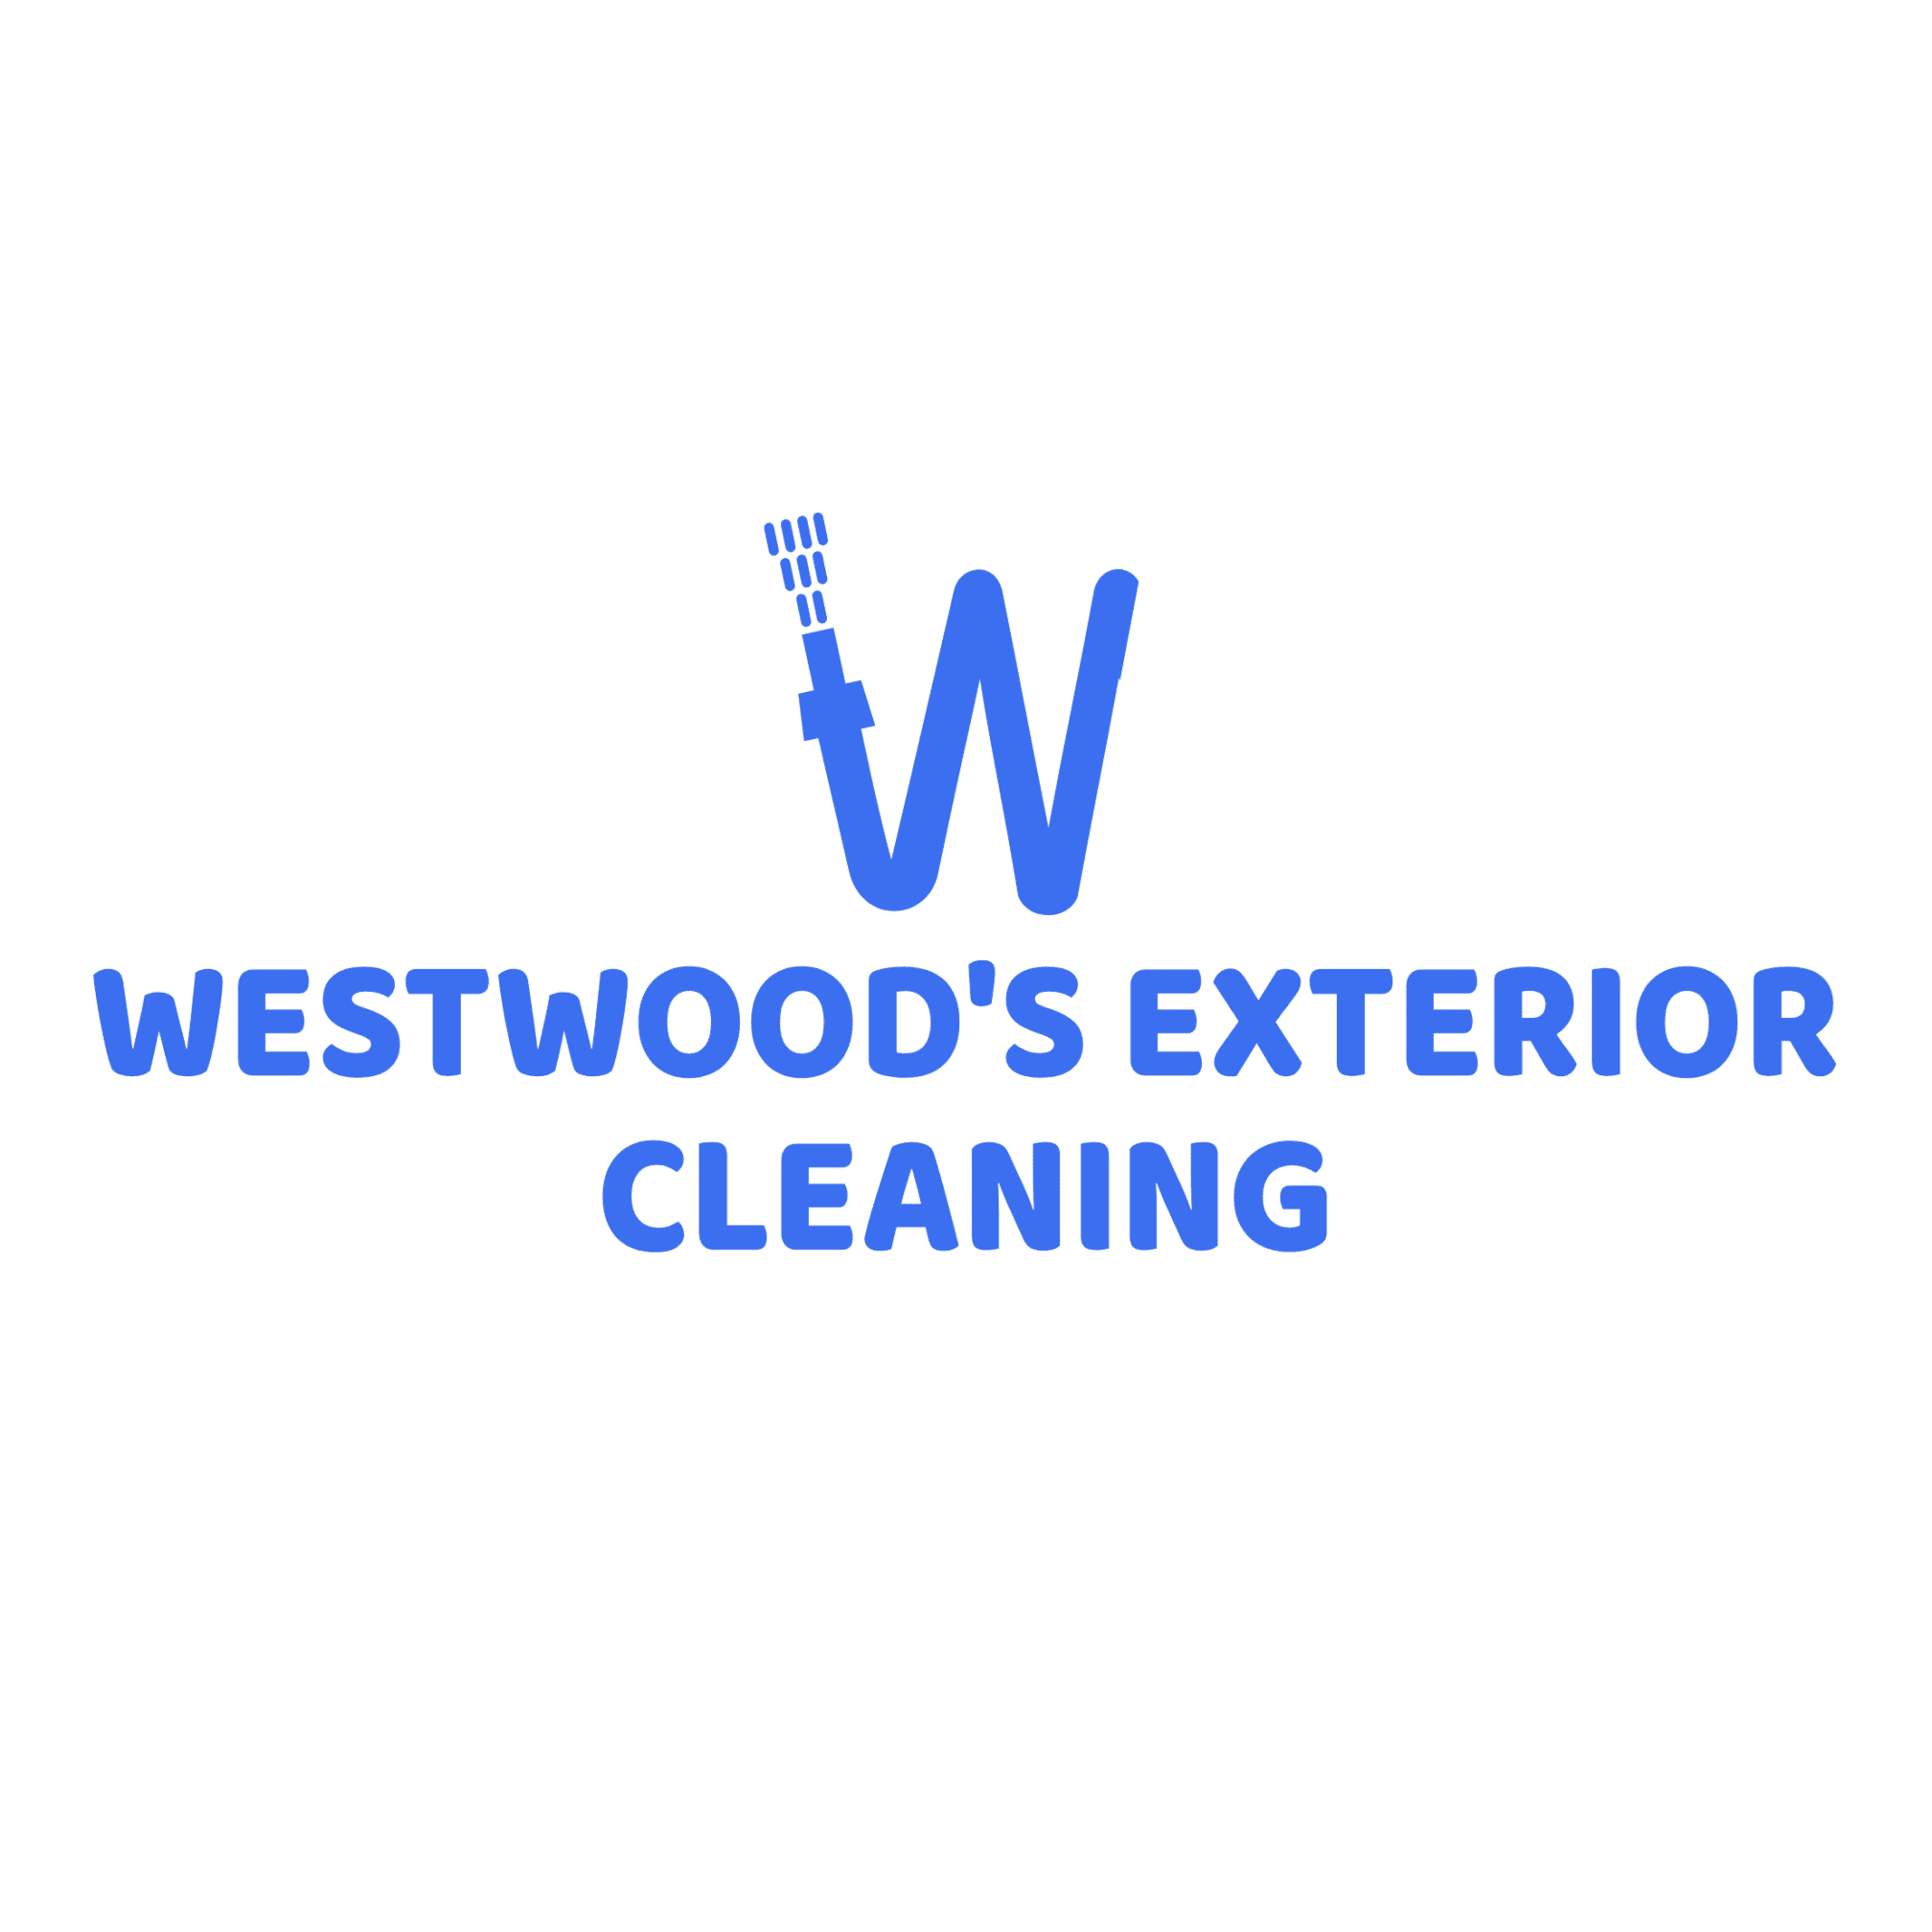 Westwood's Exterior Cleaning logo